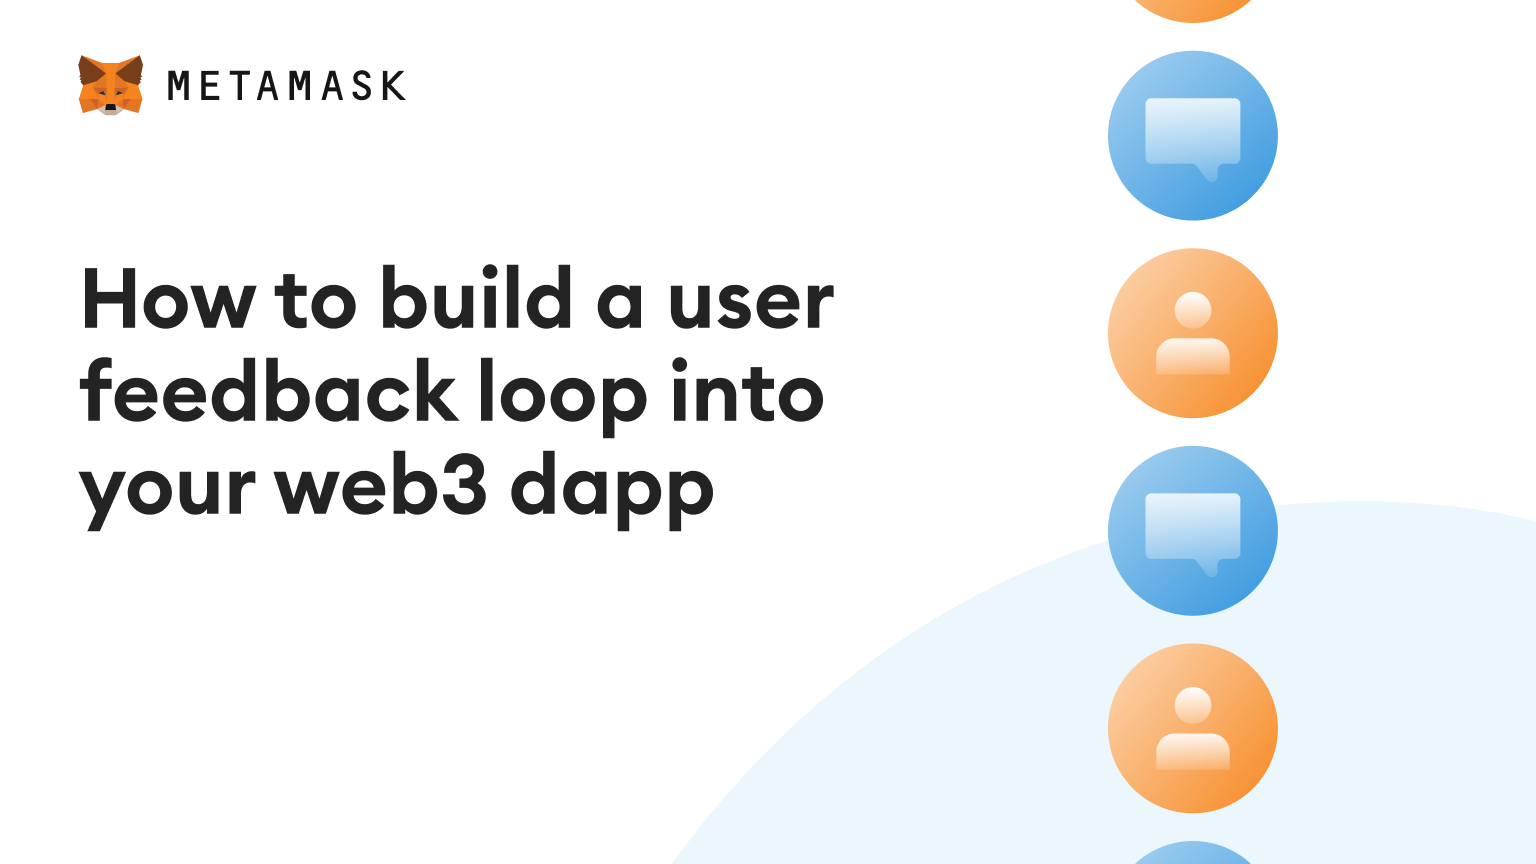 How to build a user feedback loop into your web3 dapp image